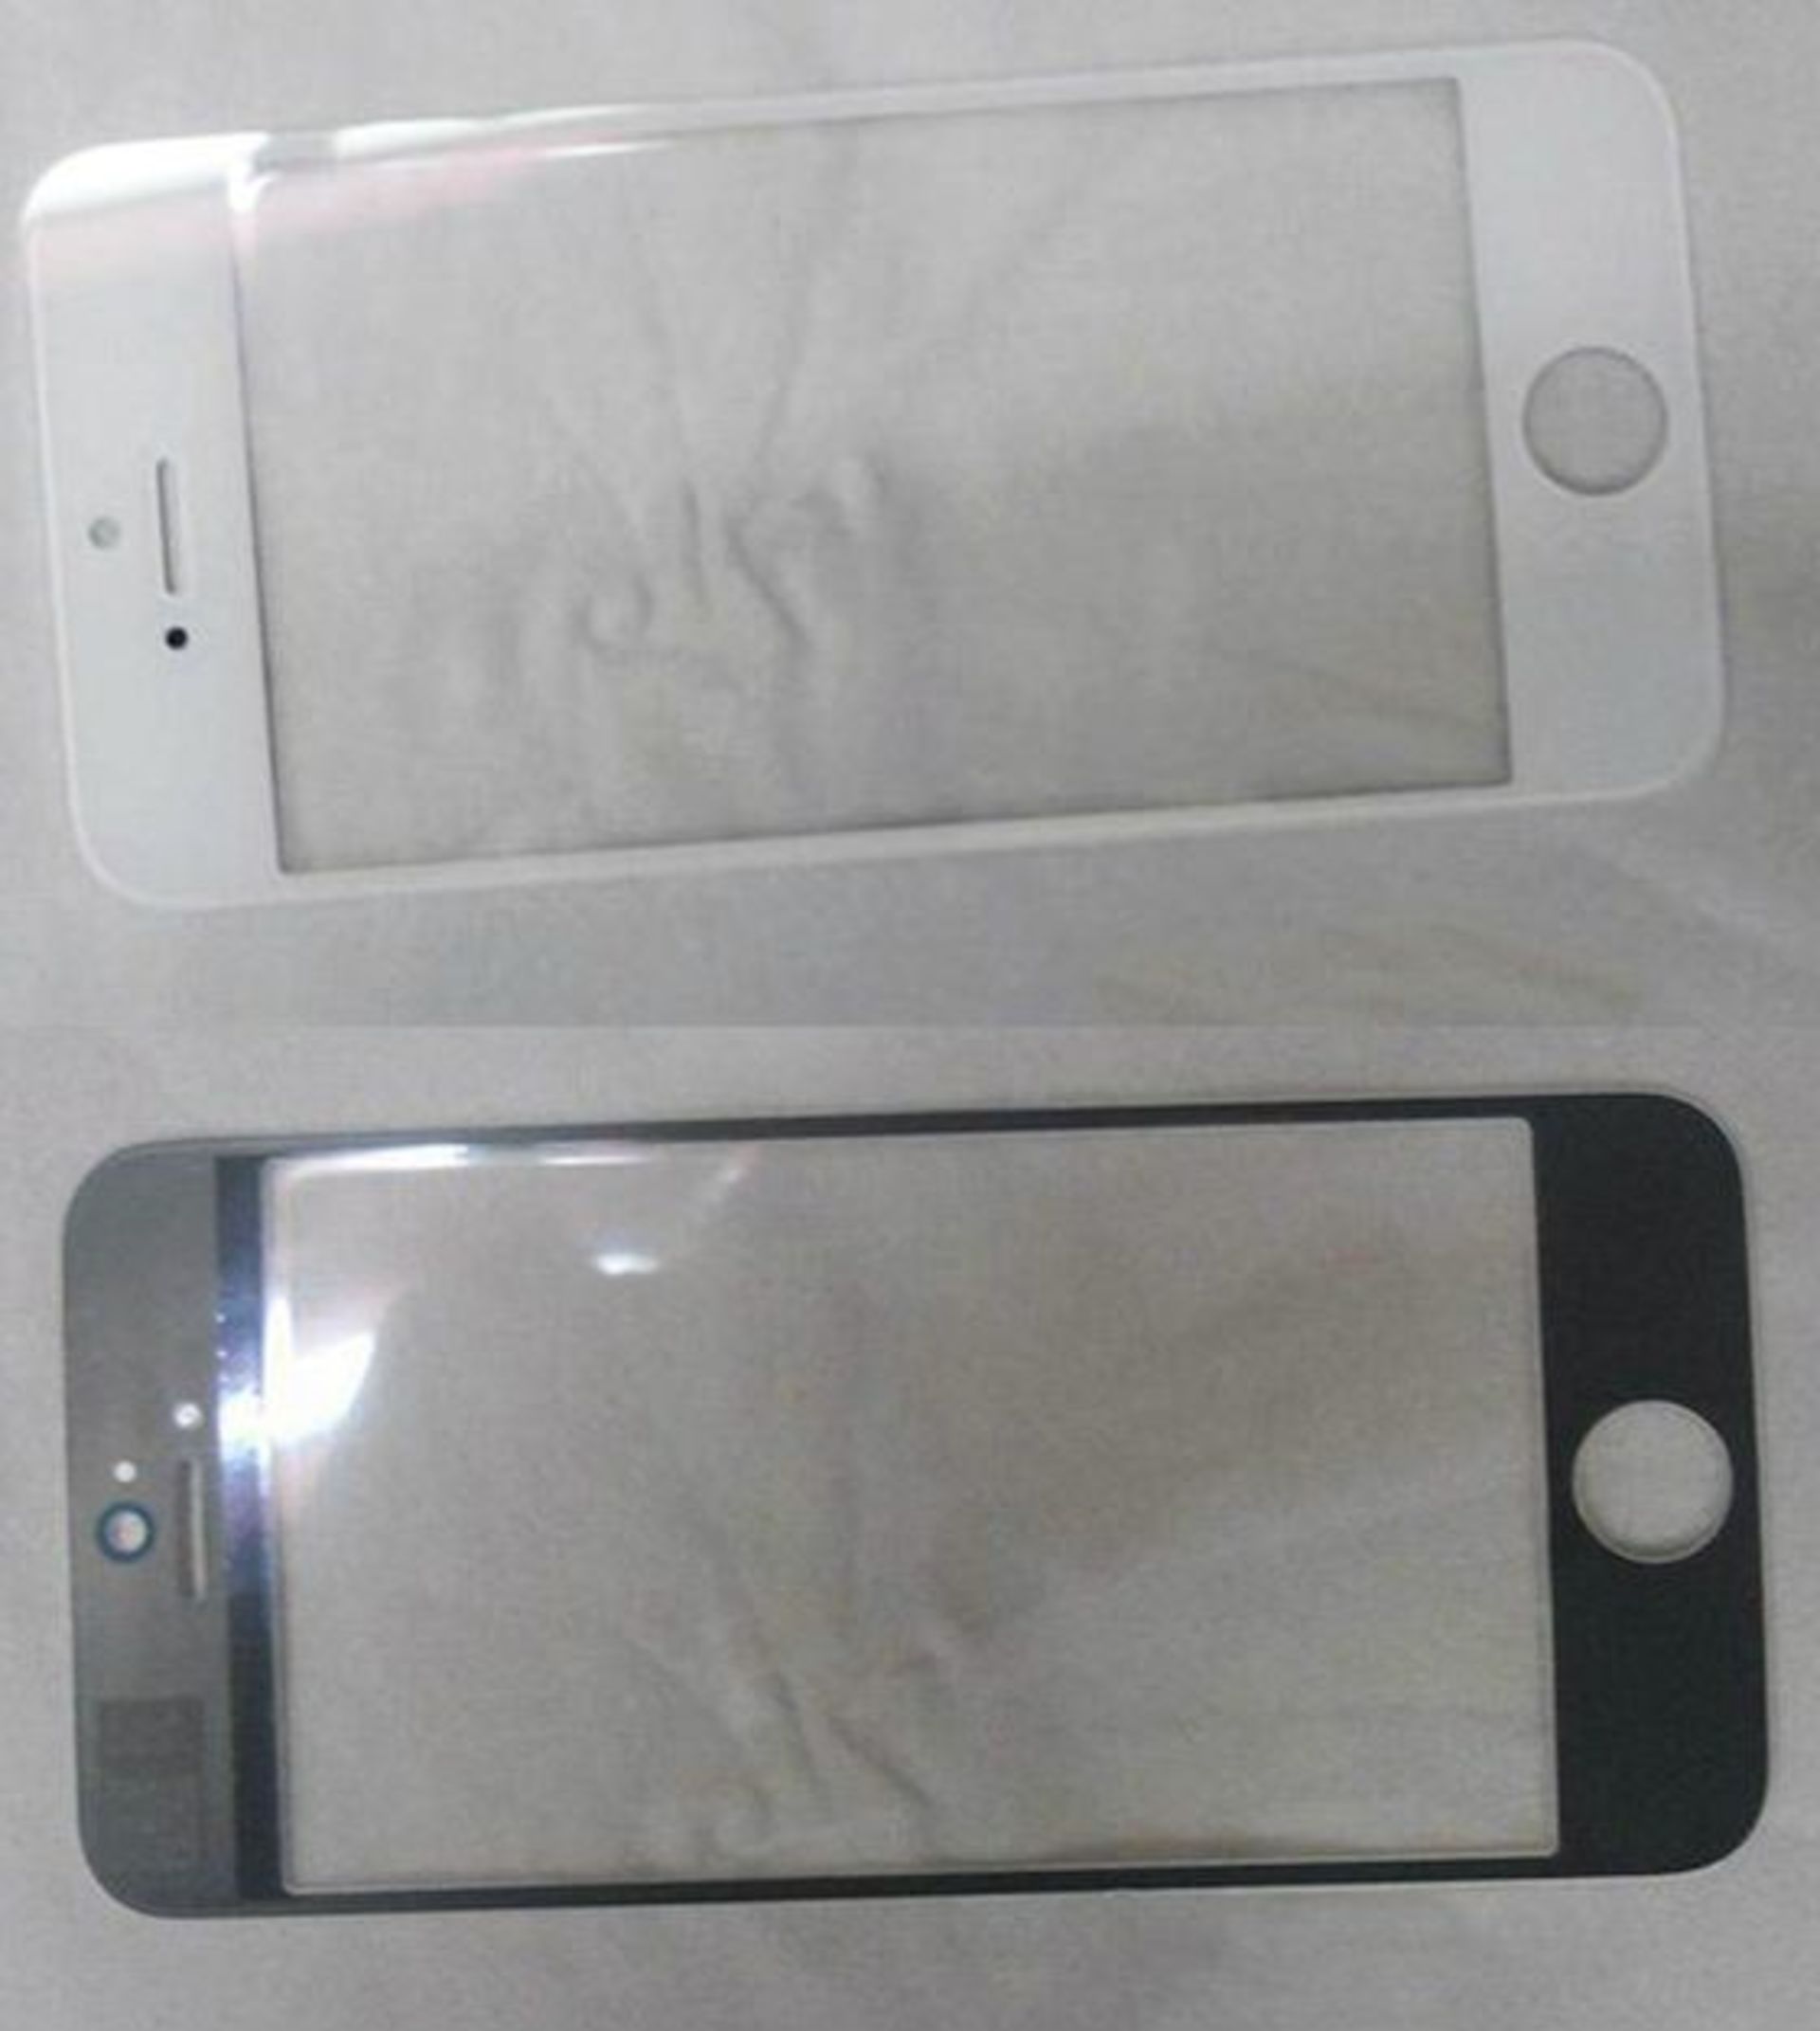 white iphone 2012 front panel